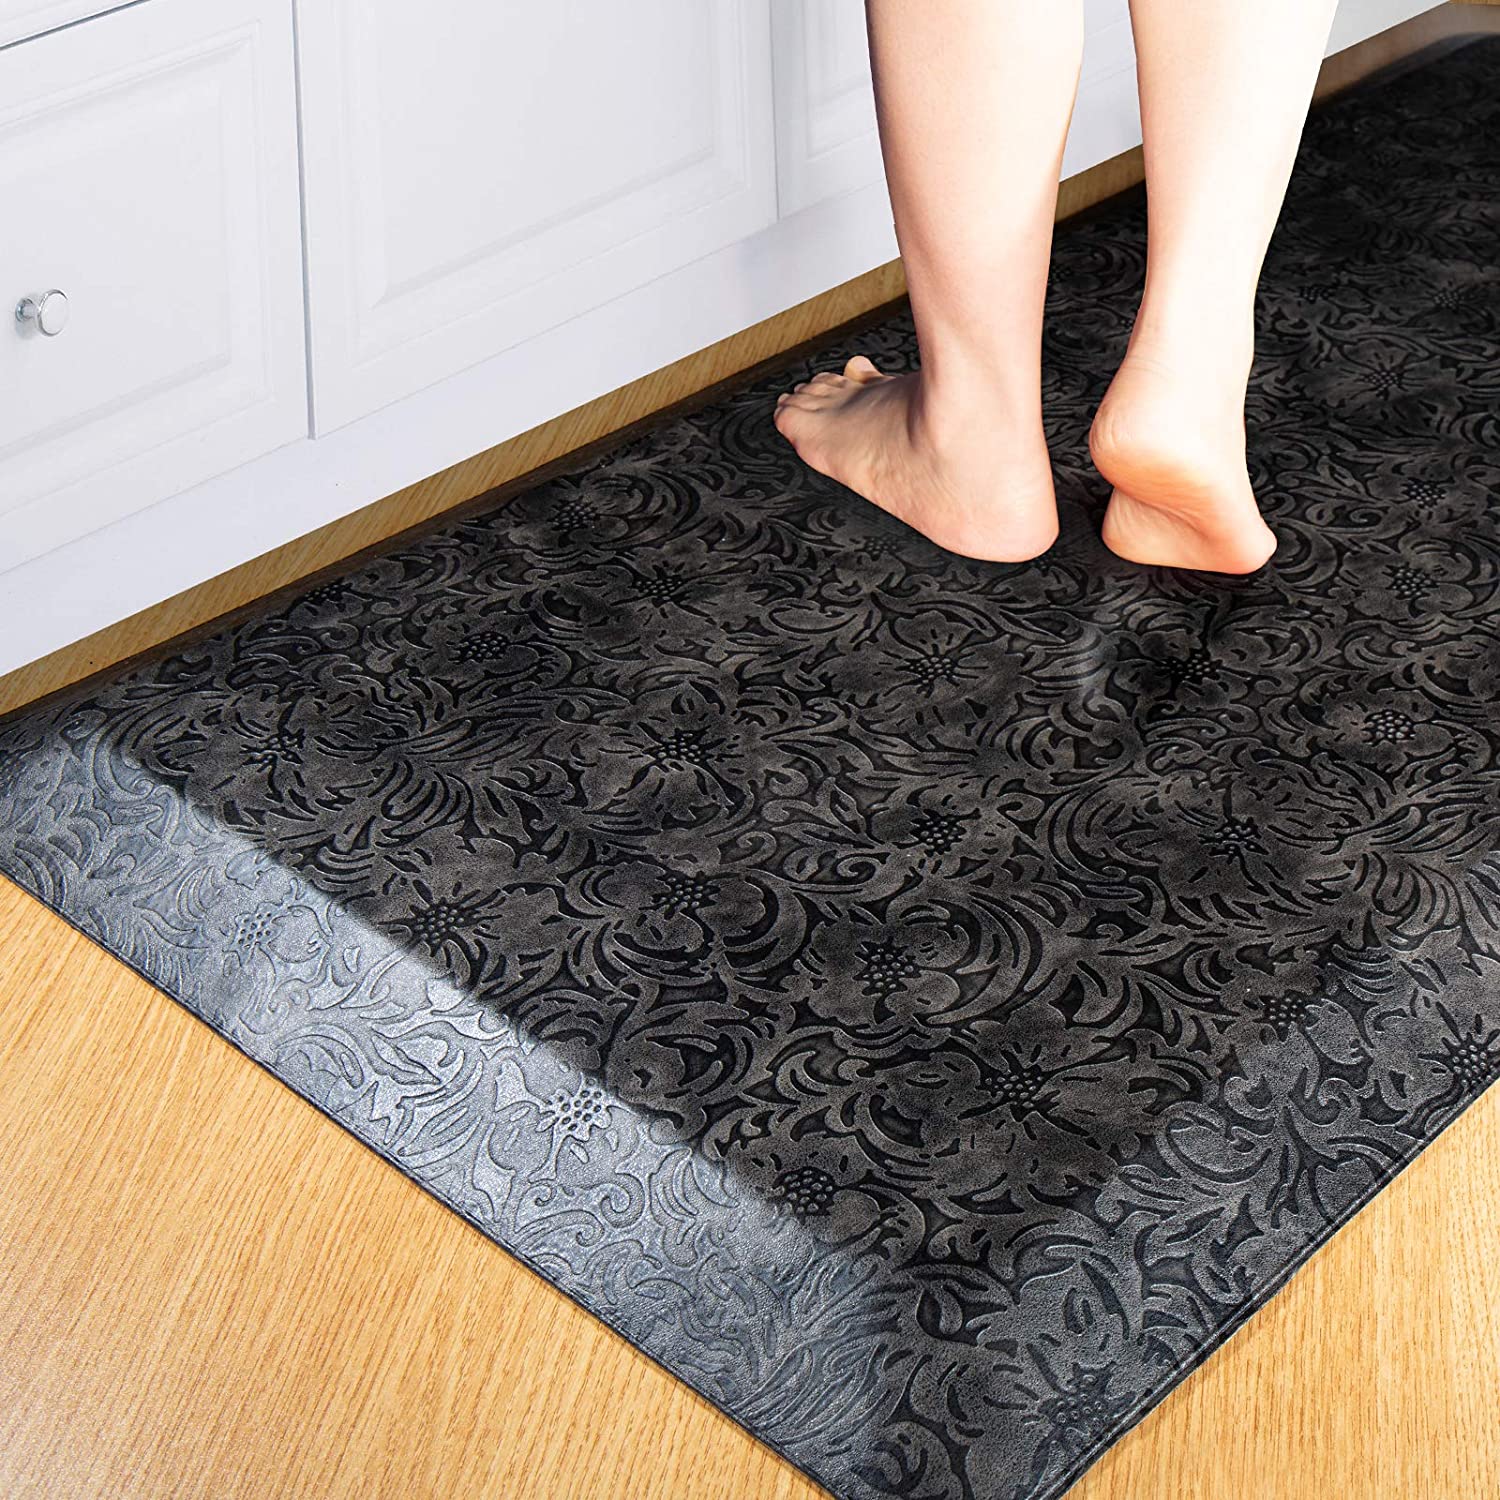 Anti Fatigue Floor Mat Thick Perfect Kitchen Carpet Standing Desk Rugs 18cm  Thickness Pvc Decor Mat Stain Resistant